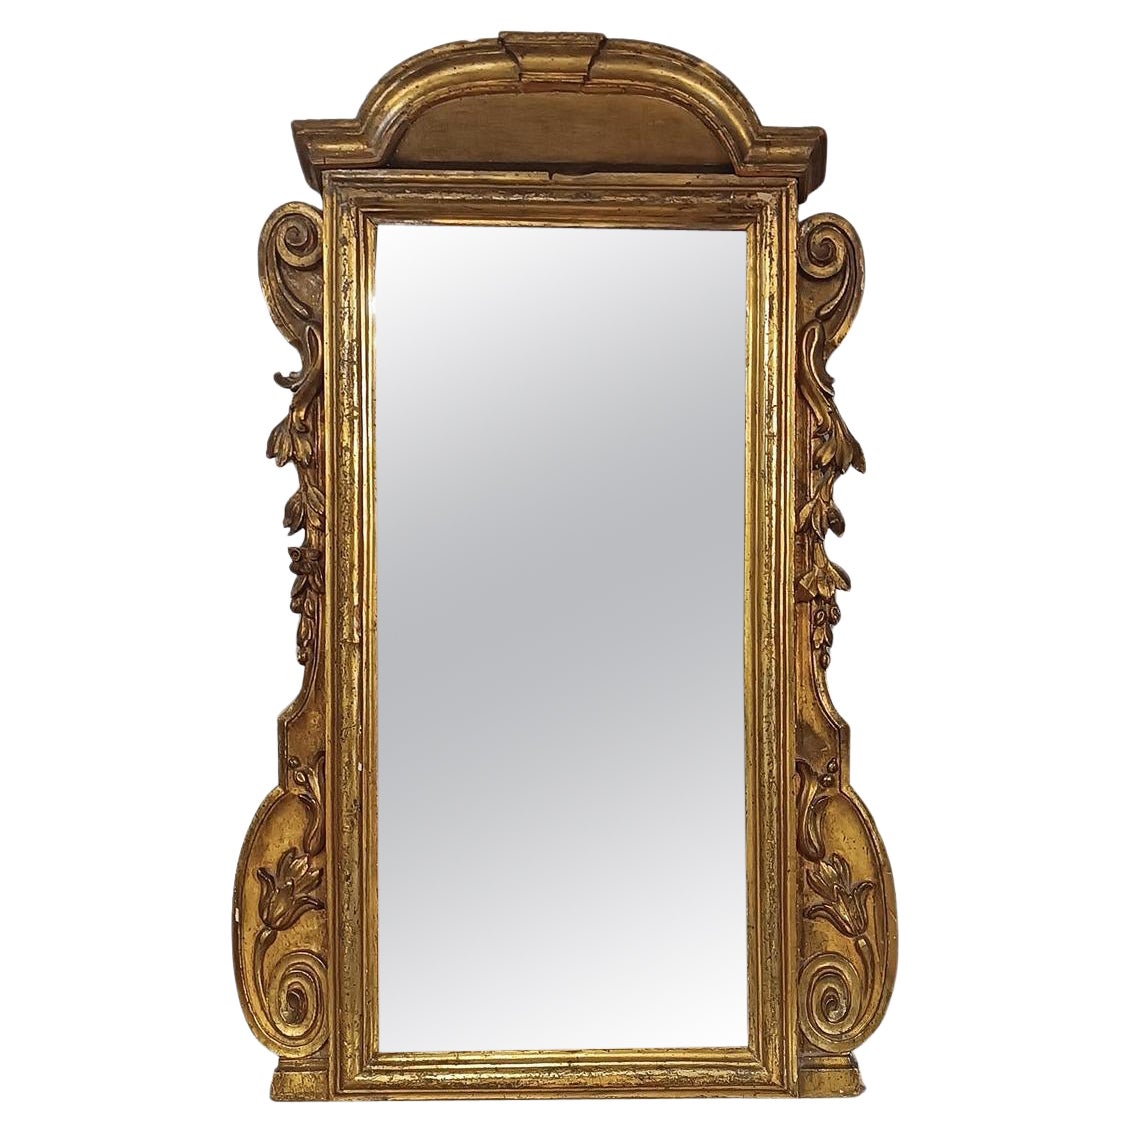 SECOND HALF OF THE 18th CENTURY SMALL MIRROR IN GOLDEN WOOD  For Sale